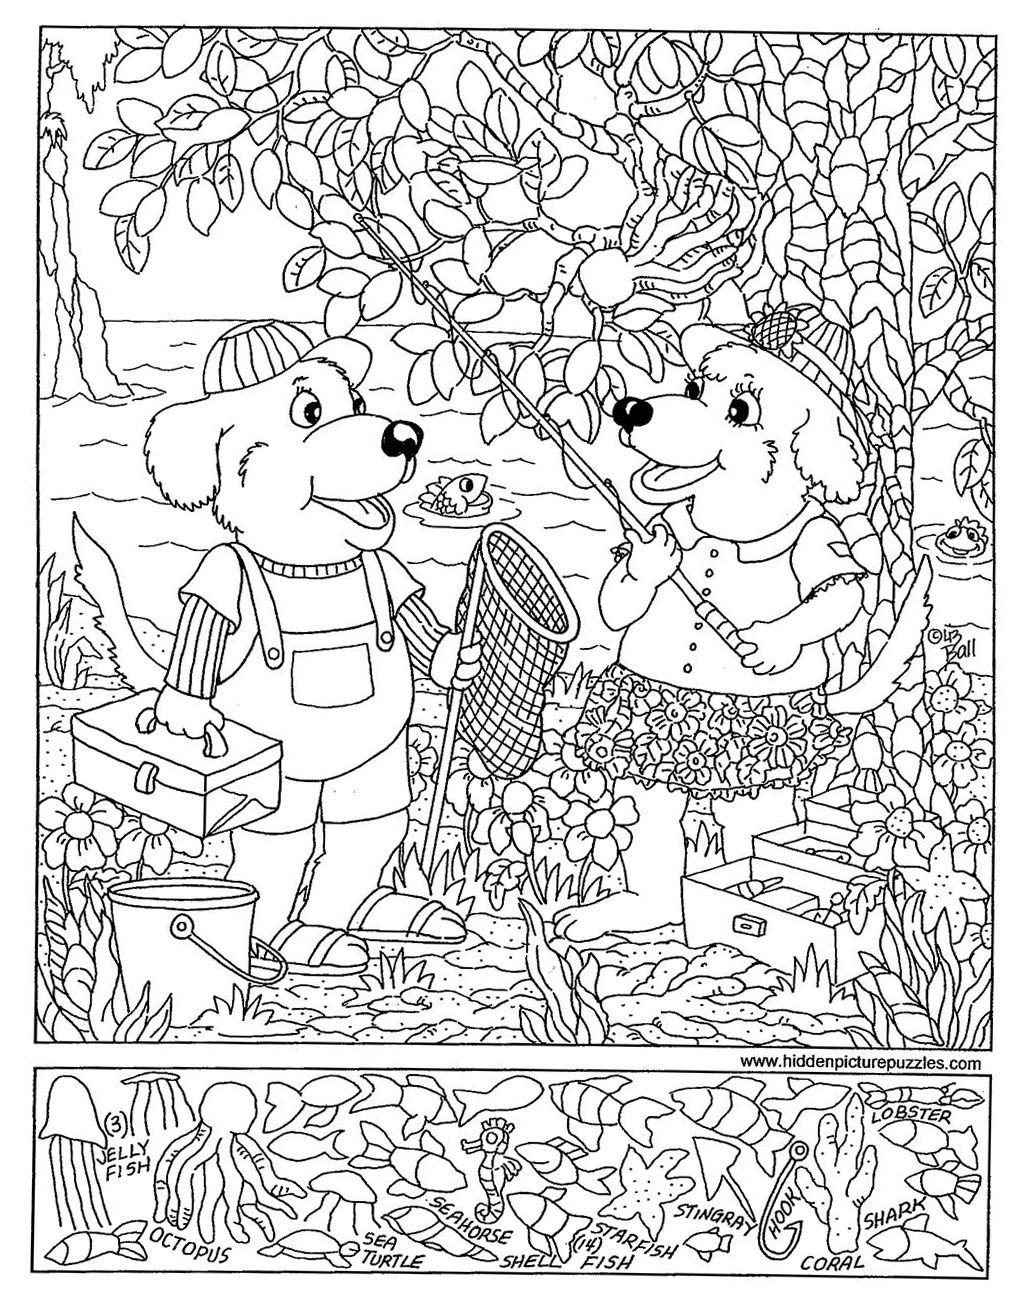 Hidden Picture Page your free hidden picture page. Hidden picture puzzles, Hidden picture printables, Hidden picture